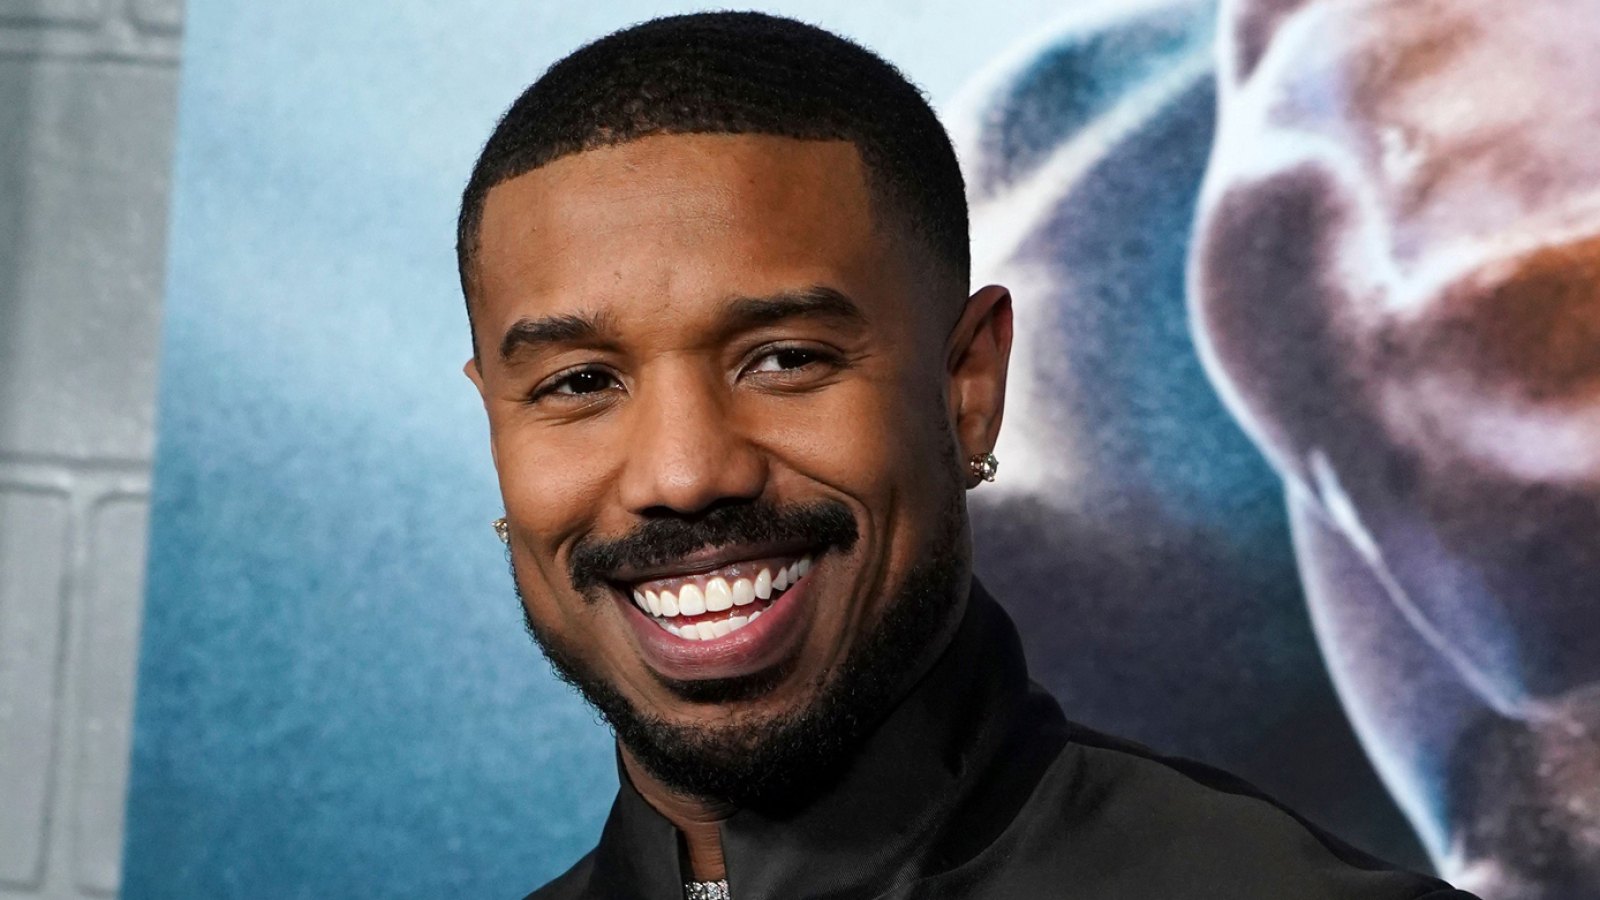 Michael B. Jordan Strips Down to His Undies for Calvin Klein and Apologizes to His Mom for Having His Goods Out